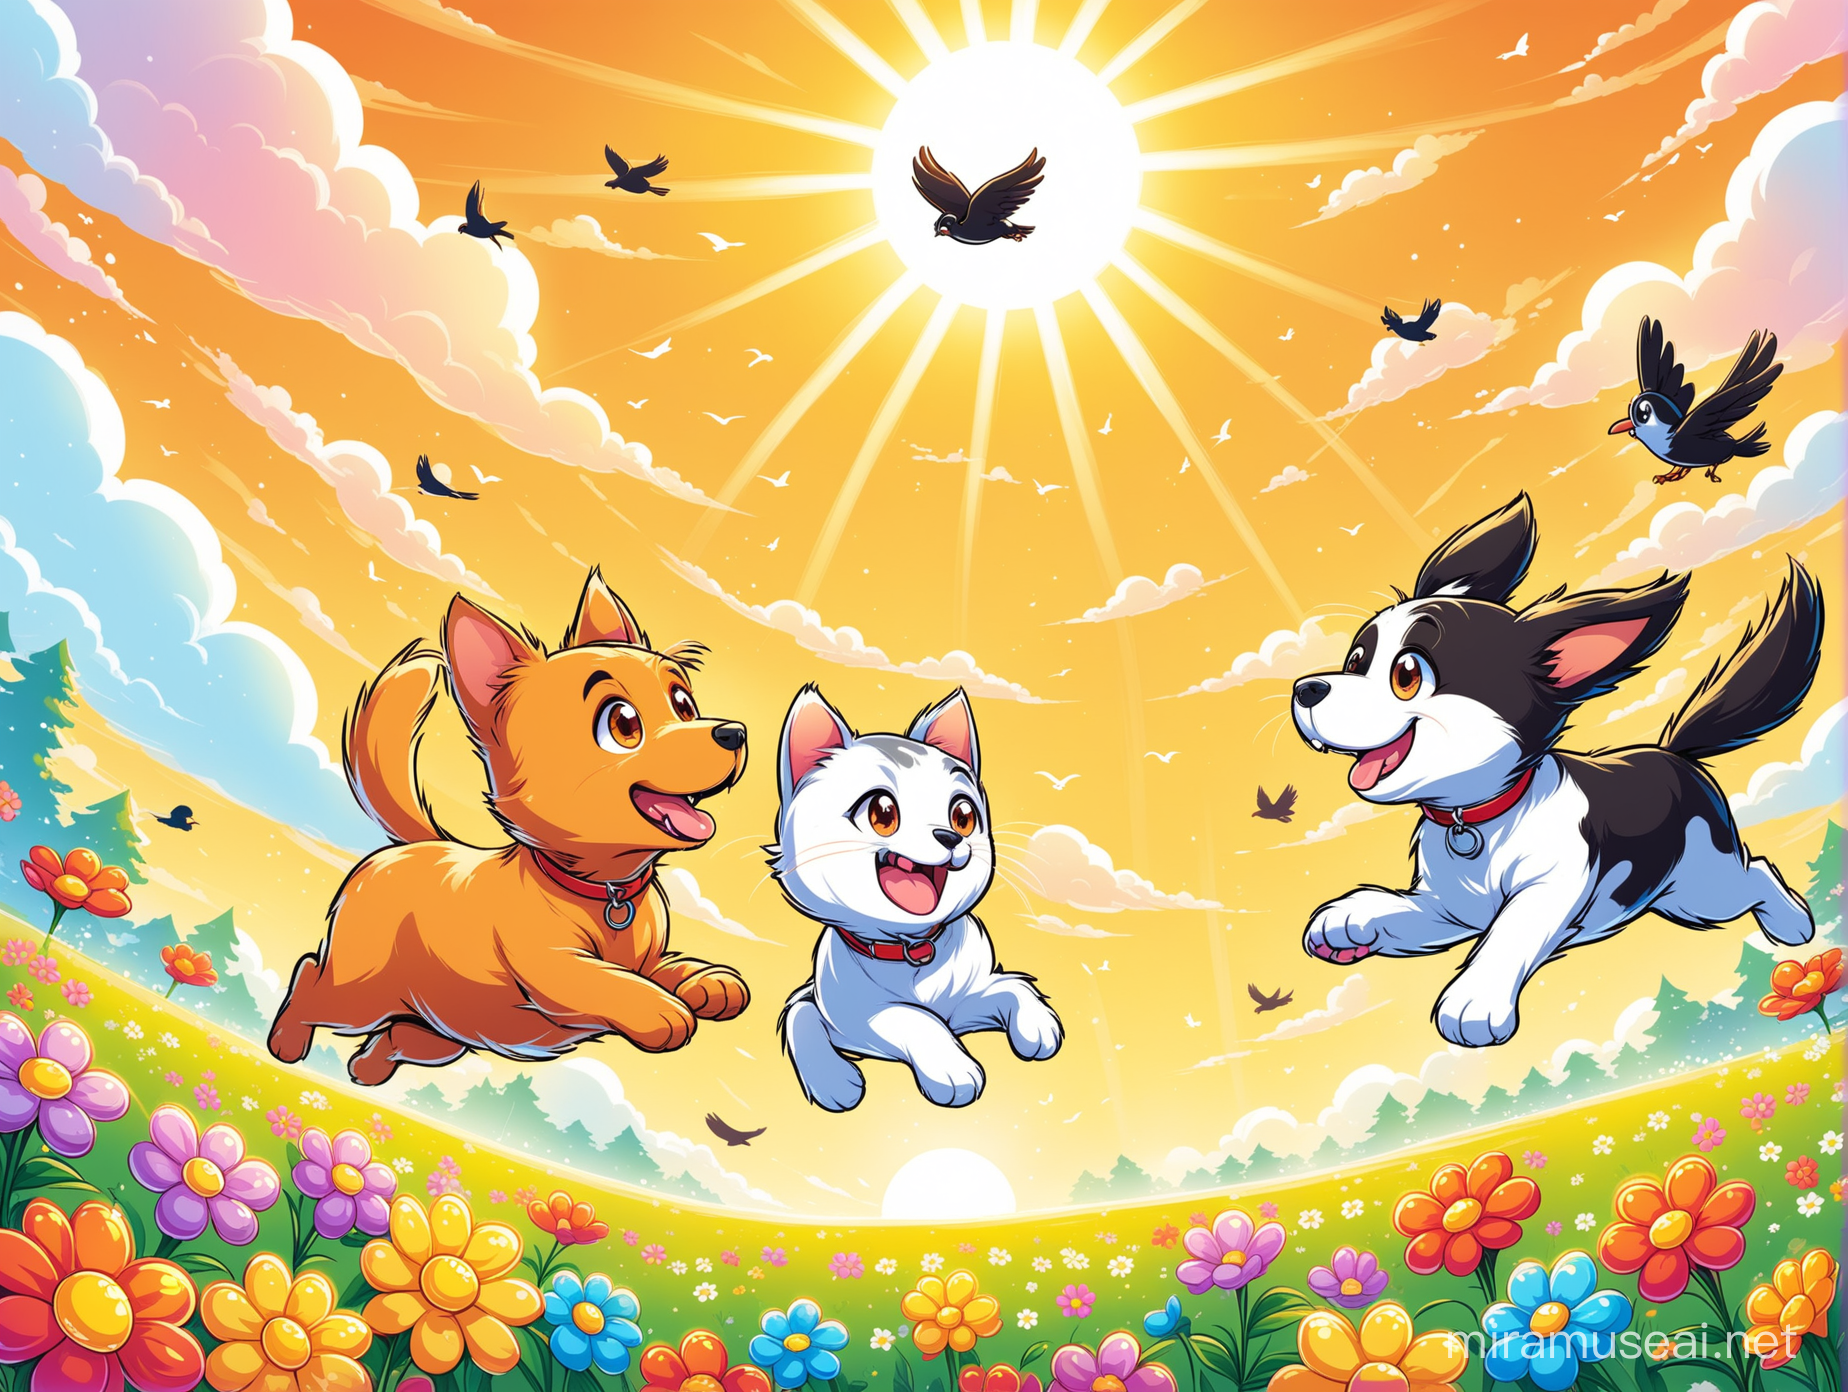 two dogs chasing a cat. colorful cartoon style. nice flowers, sun shining, birds flying